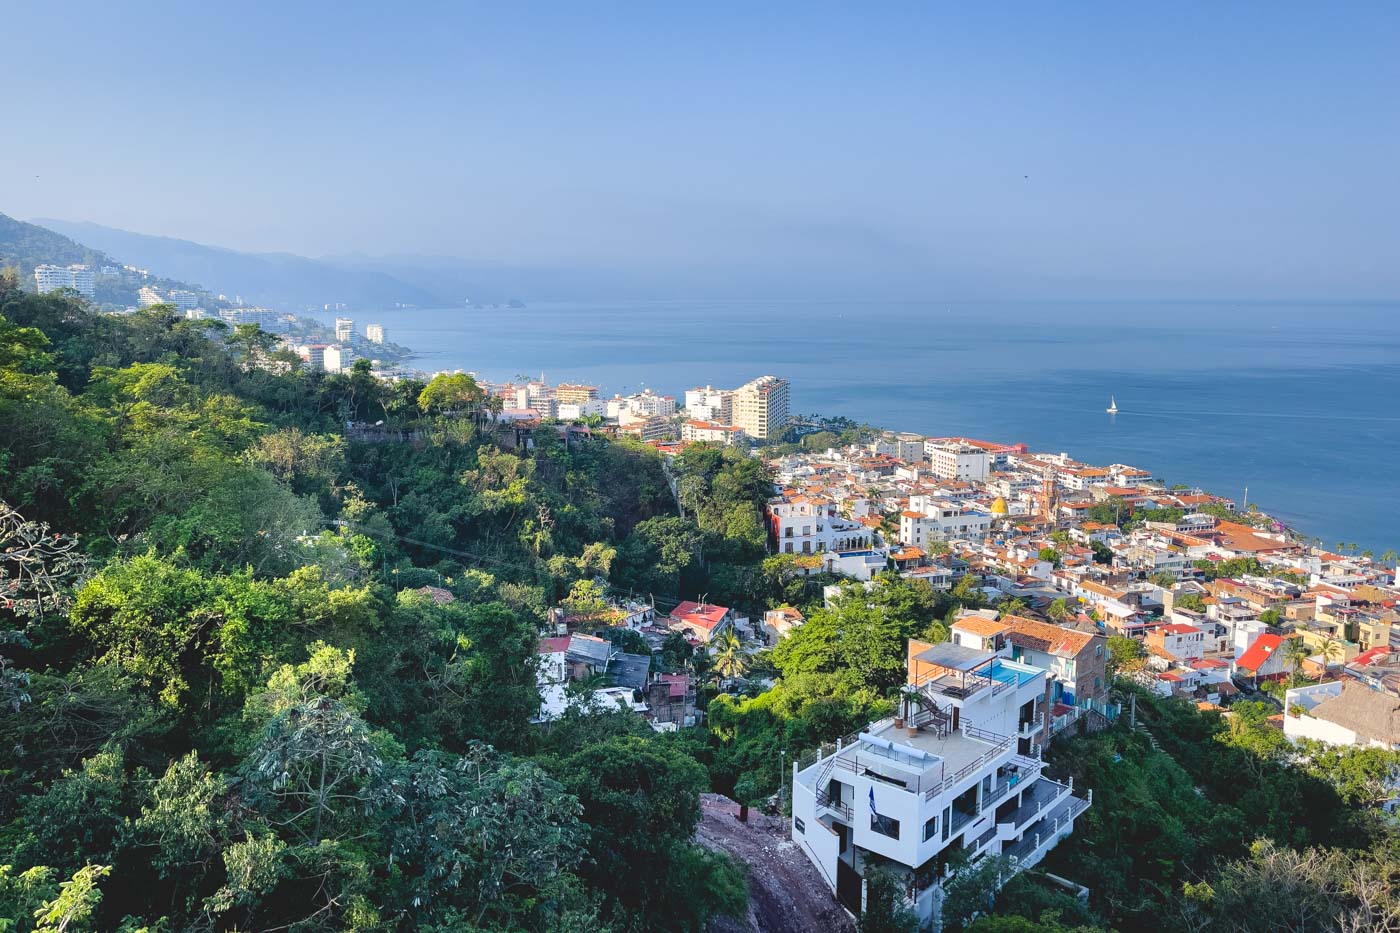 A view over Puerto Vallarta's buildings and seafront as seen from Mirador La Cruz.